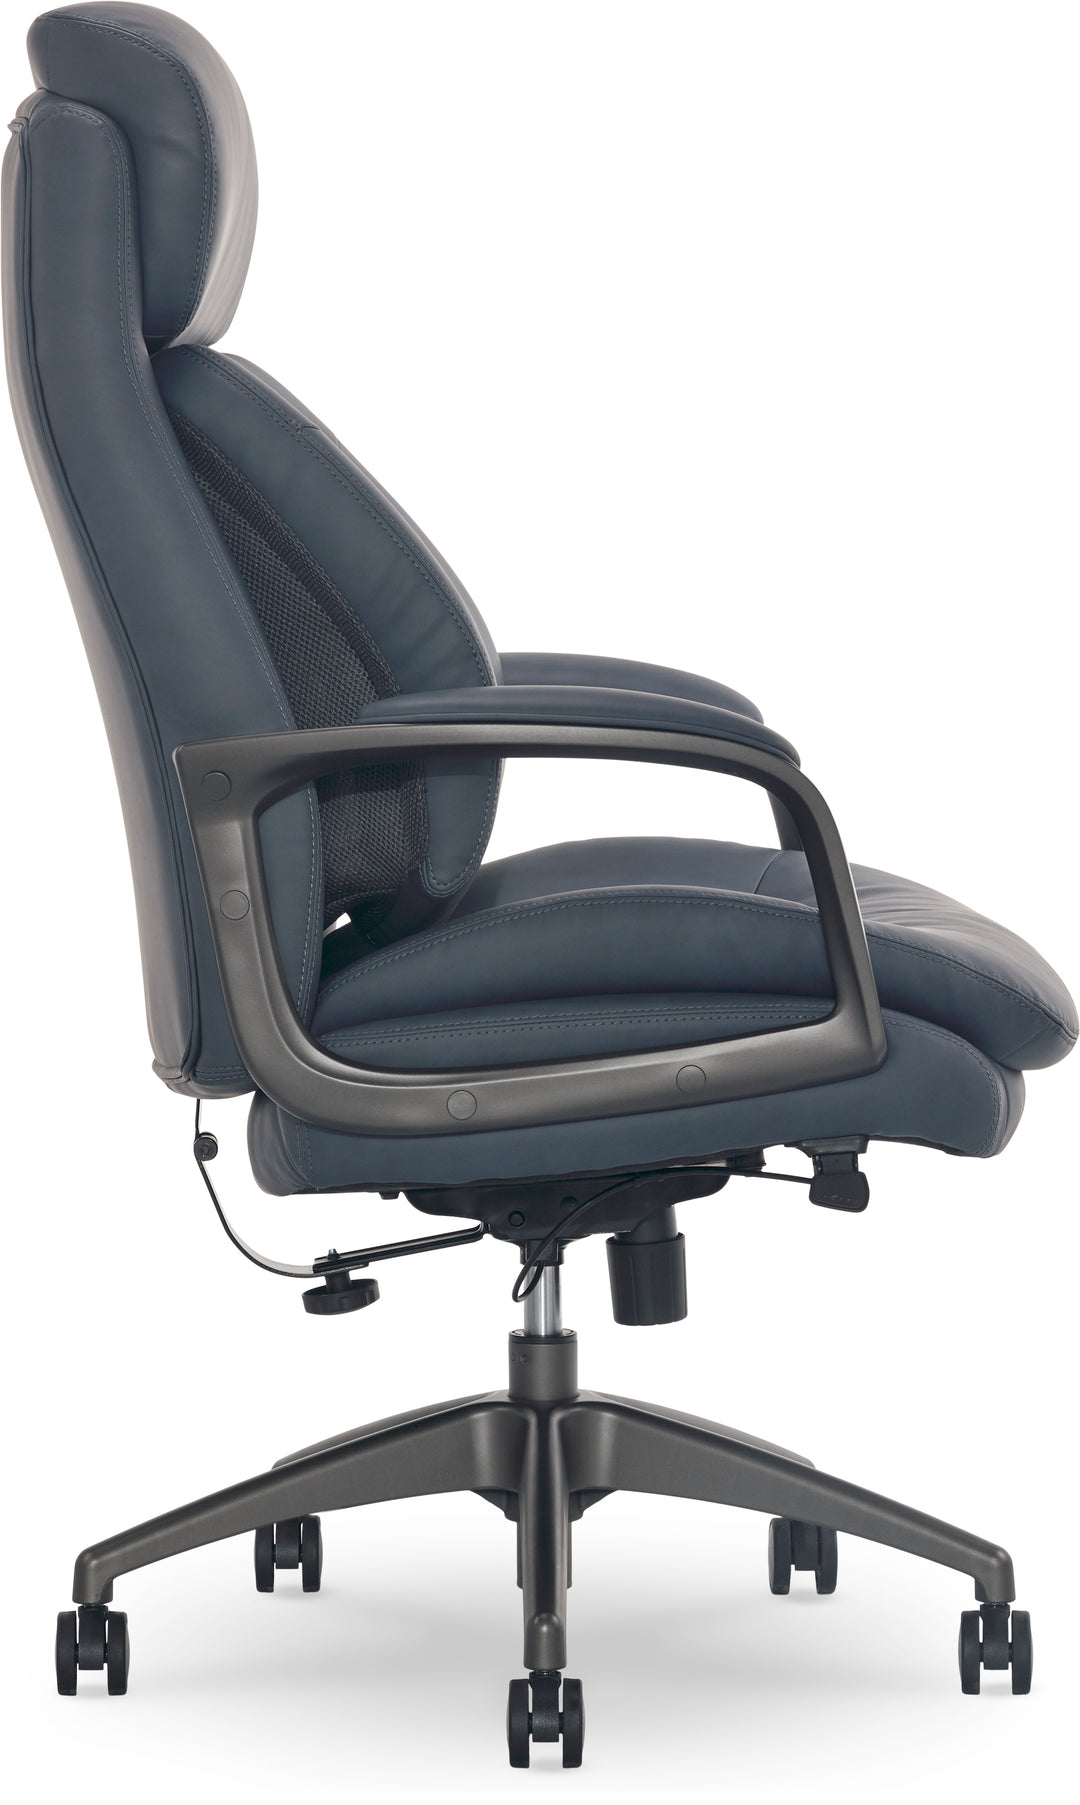 La-Z-Boy - Calix Big and Tall Executive Chair with TrueWellness Technology Office Chair - Slate_4